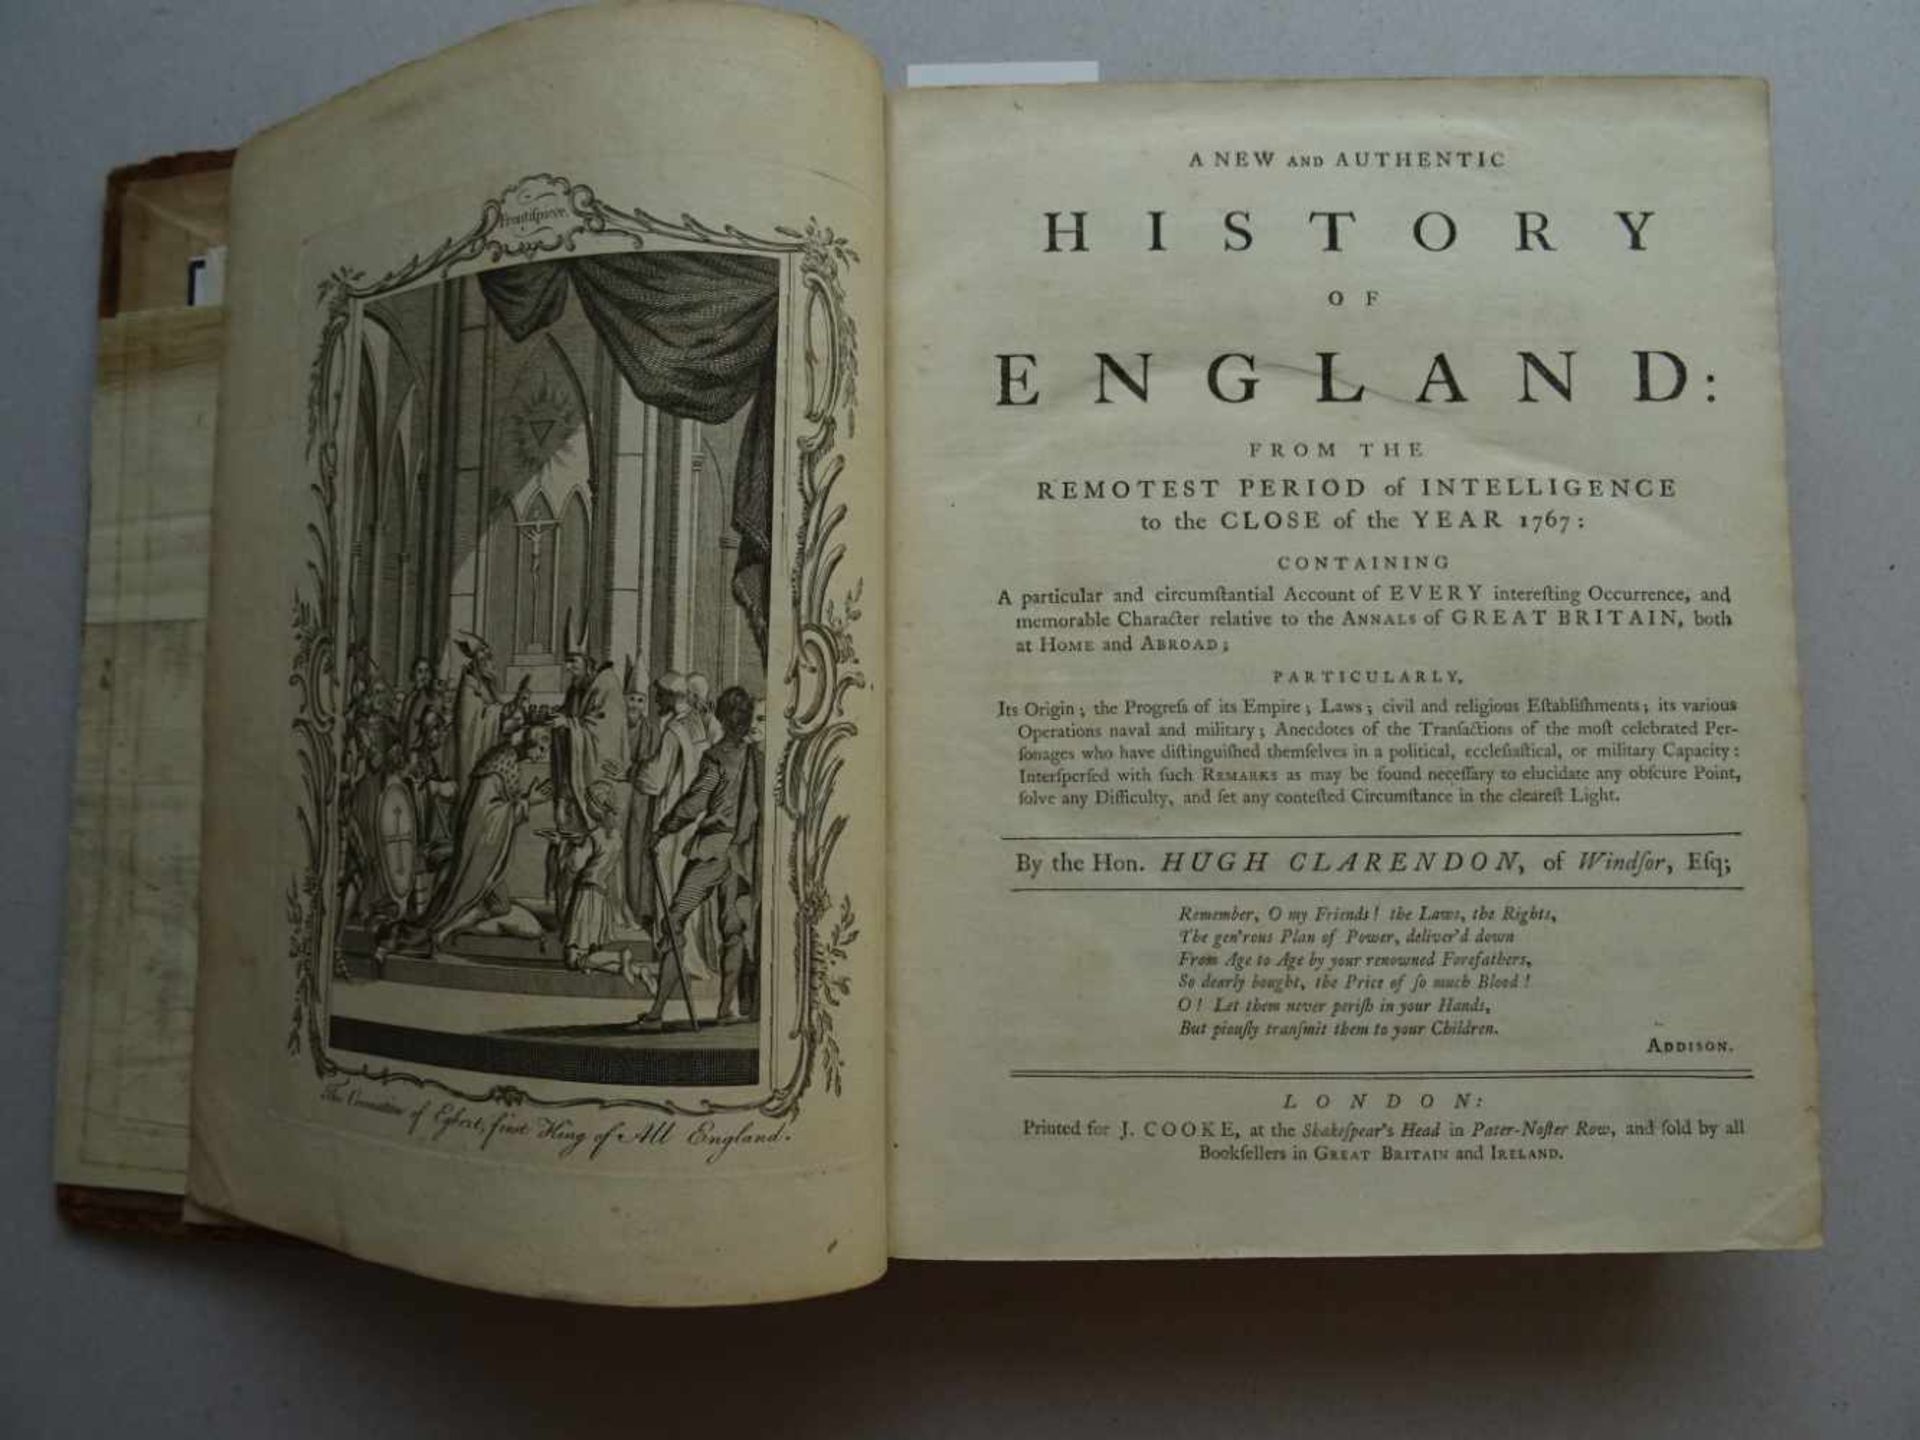 Großbritannien.- Clarendon, H.A new and authentic history of England: from the remotest period of